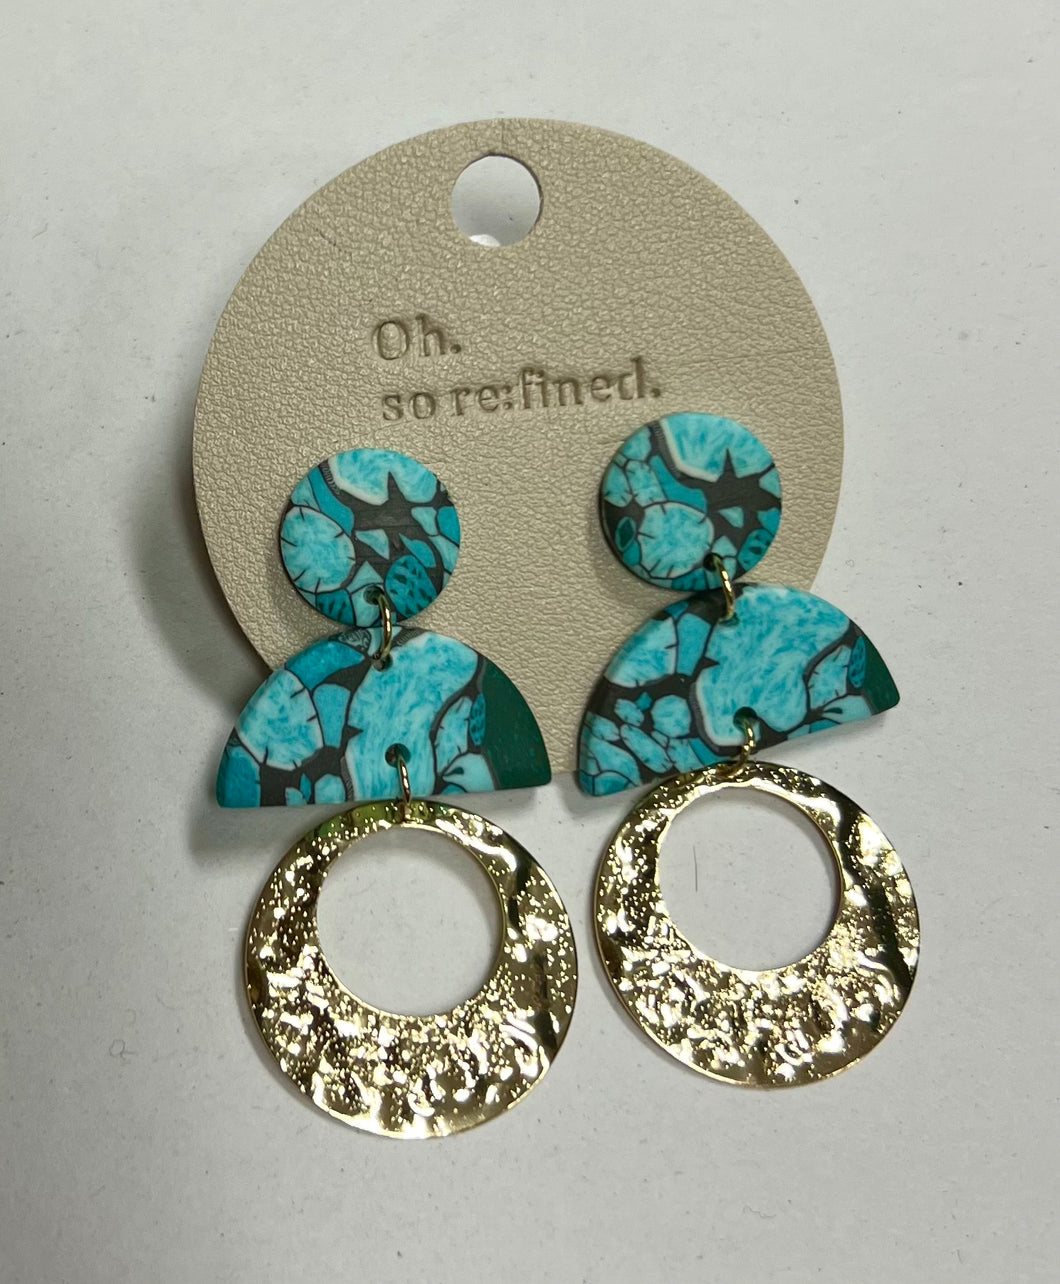 Oh, So Refined Blue and Gold Earrings